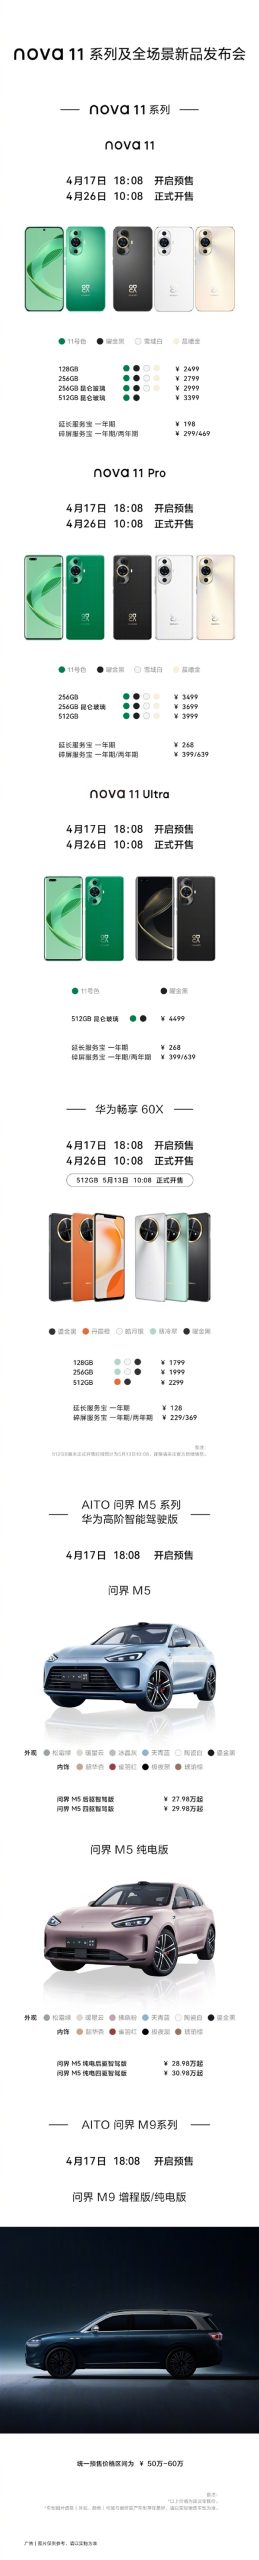 Huawei nova11, the price summary of new products in the world series: the most expensive products from 68 yuan rushed to 600,000 yuan.